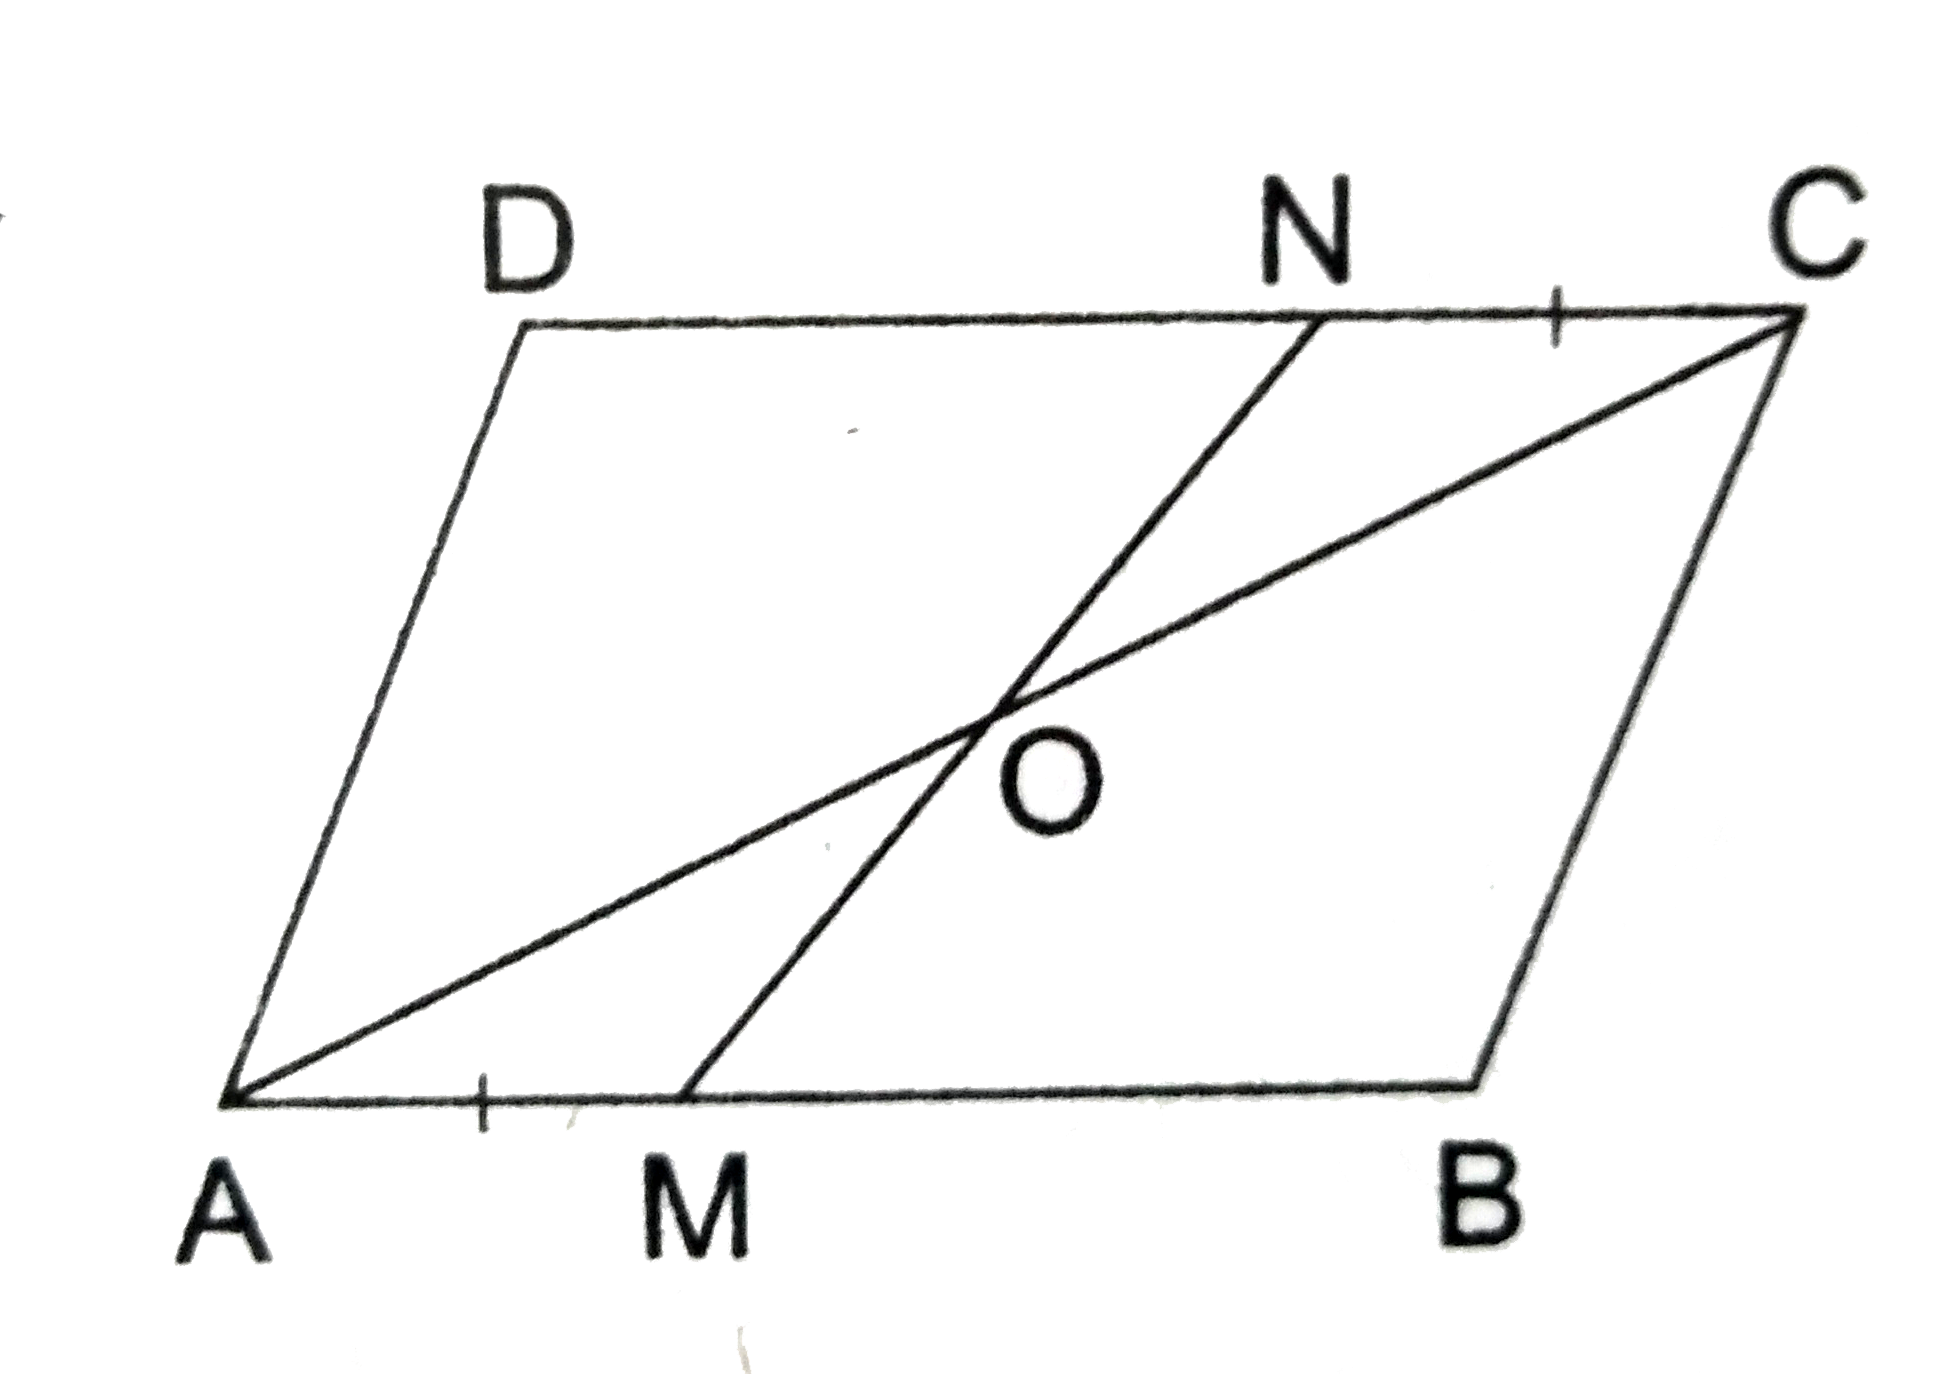 In a parallelogram ABCD, points M and N have been taken on opposite sides AB and CD respectively such that AM = CN. Show that AC and MN bisect  each other.